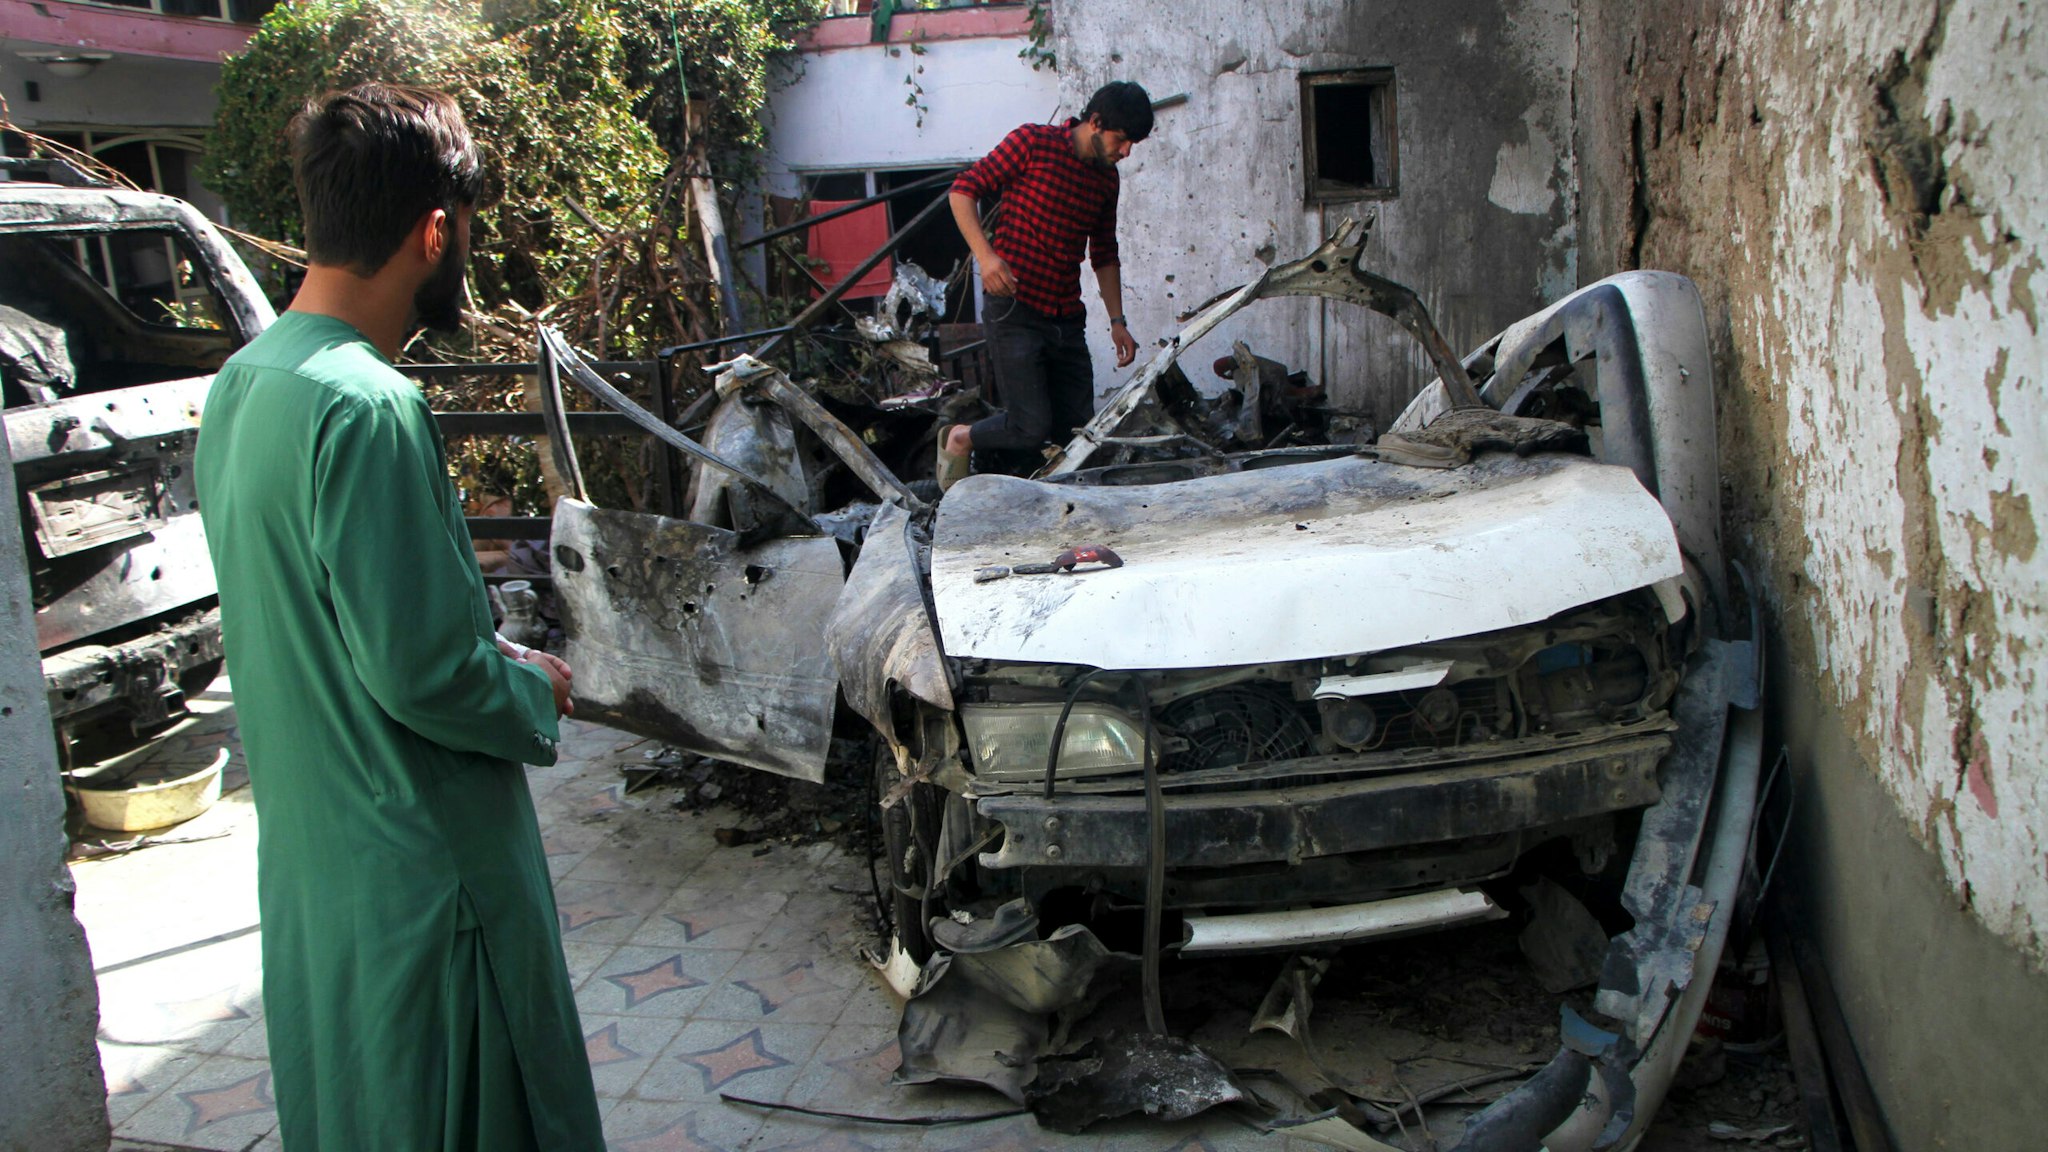 Photo taken on Sept. 2, 2021 shows damaged vehicles at the site of the U.S. airstrike in Kabul, capital of Afghanistan. TO GO WITH: "Feature: Neighbor, relative of drone strike victims lambaste U.S. killing in Afghanistan.